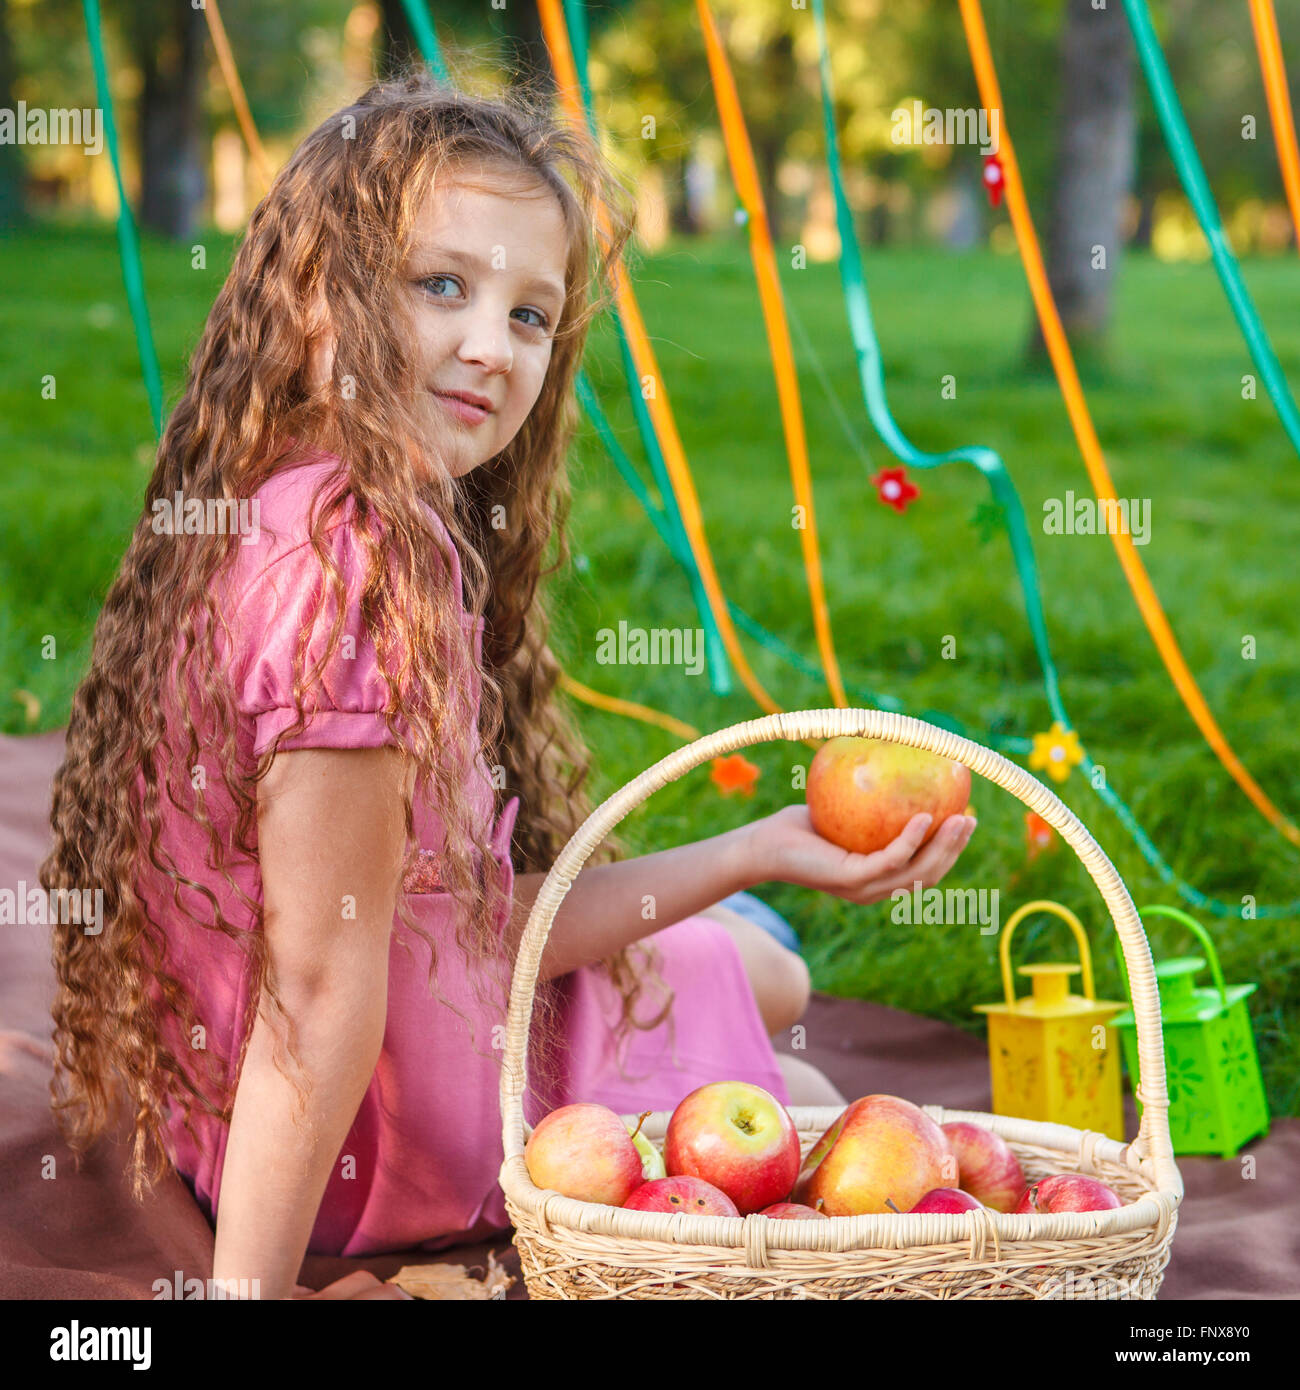 girl sitting on the plaid in the park with a basket of apples Stock Photo